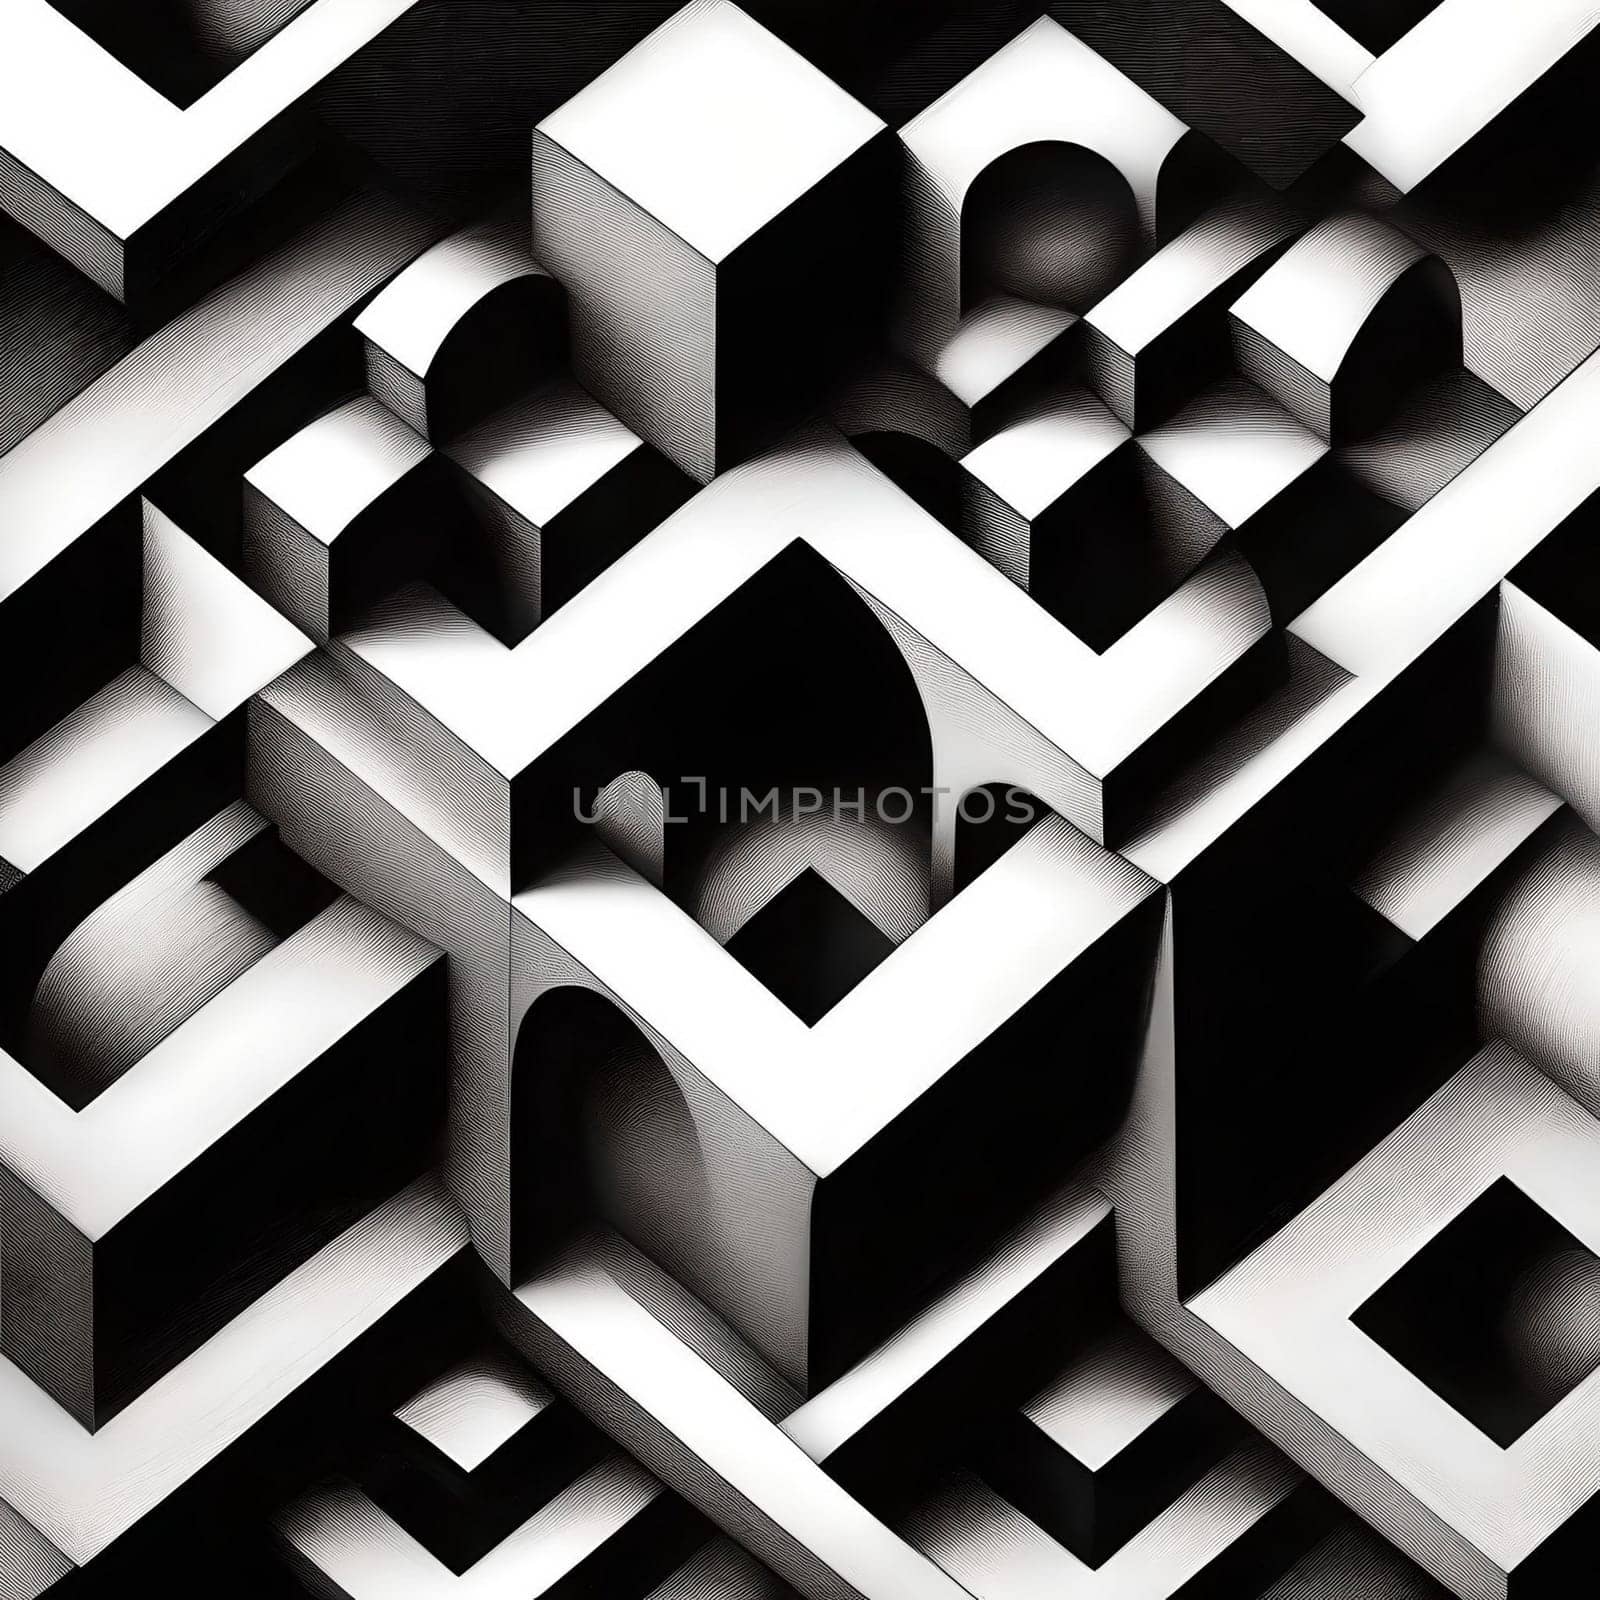 Monochrome abstract geometric shapes forming an optical illusion.